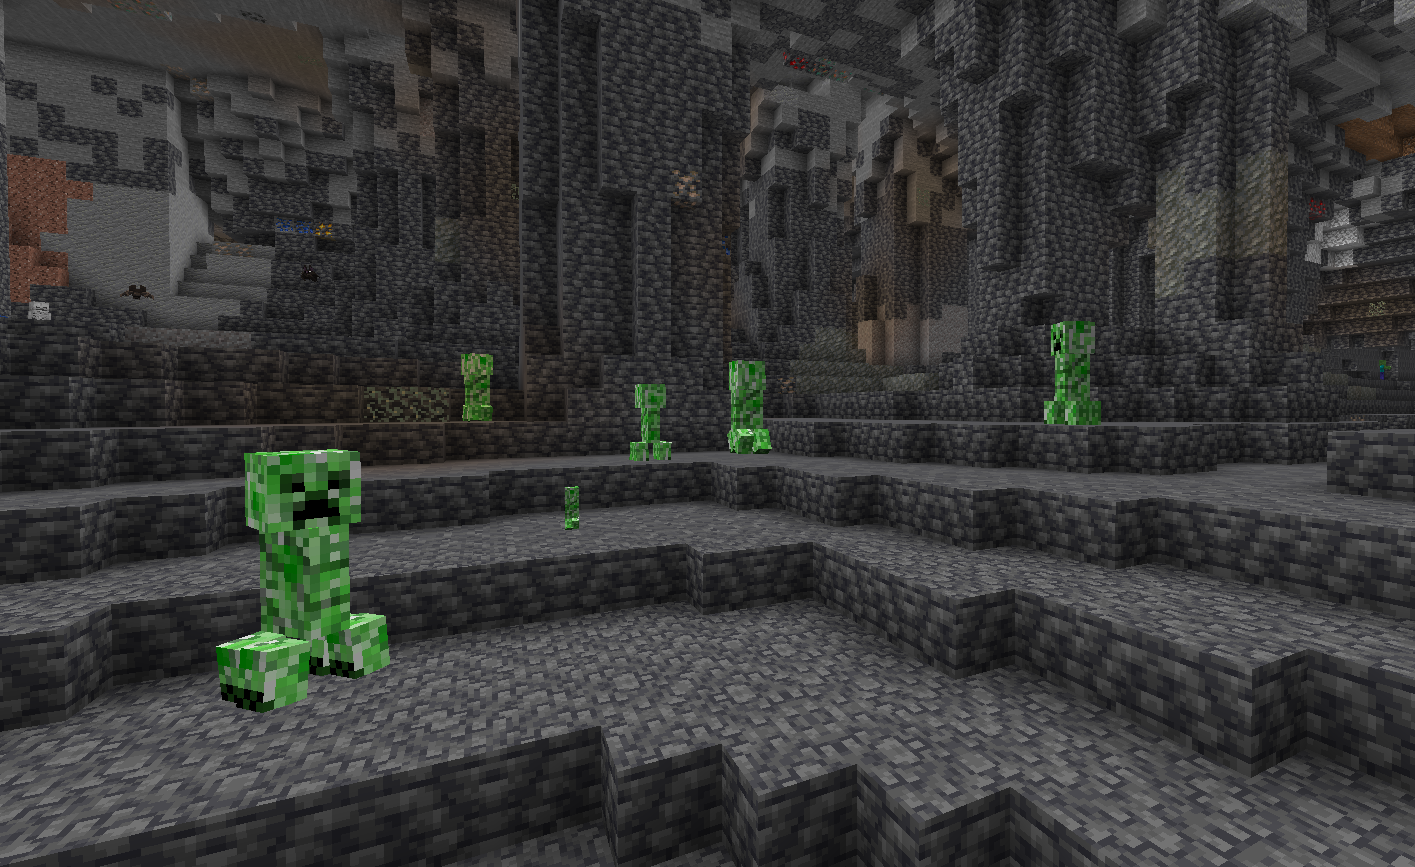 Creepers naturally spawning in a cave